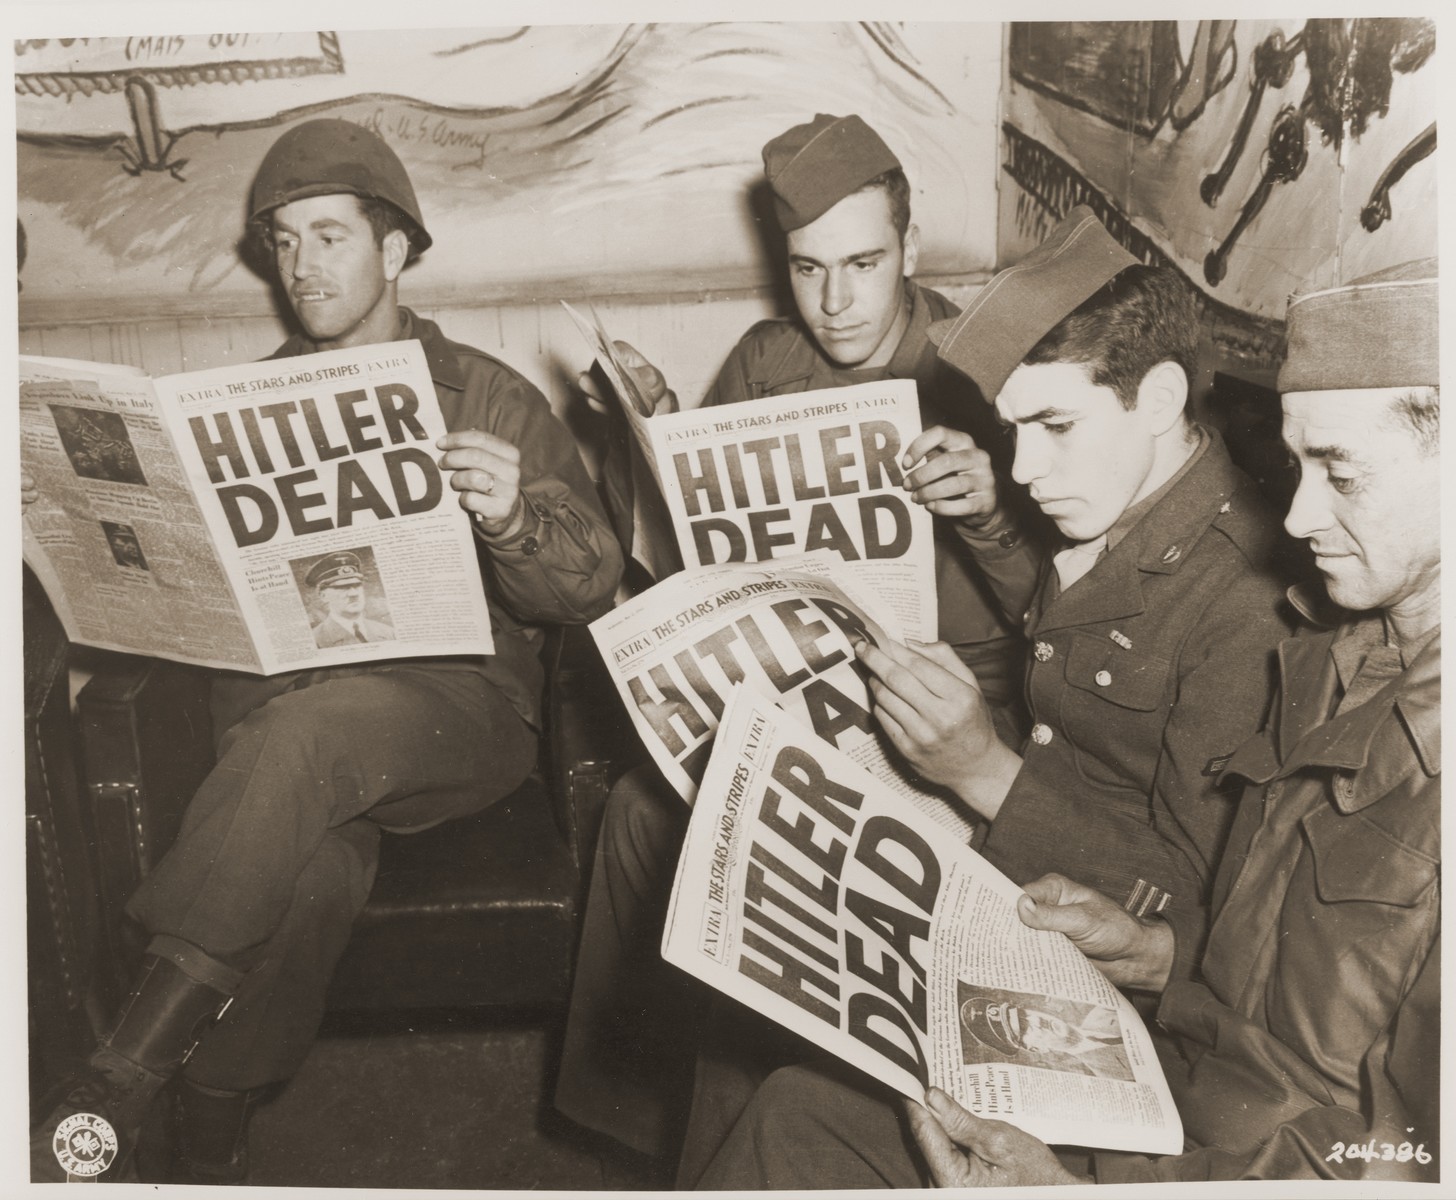 American soldiers read of Hitler's death in an "extra" edition of "Stars and Stripes."  Pictured left to right: Pfc. Leonard A. Davis, Pfc. Richard Webster, Pfc. Julian Bellavance, and Pfc. Lex Hall.